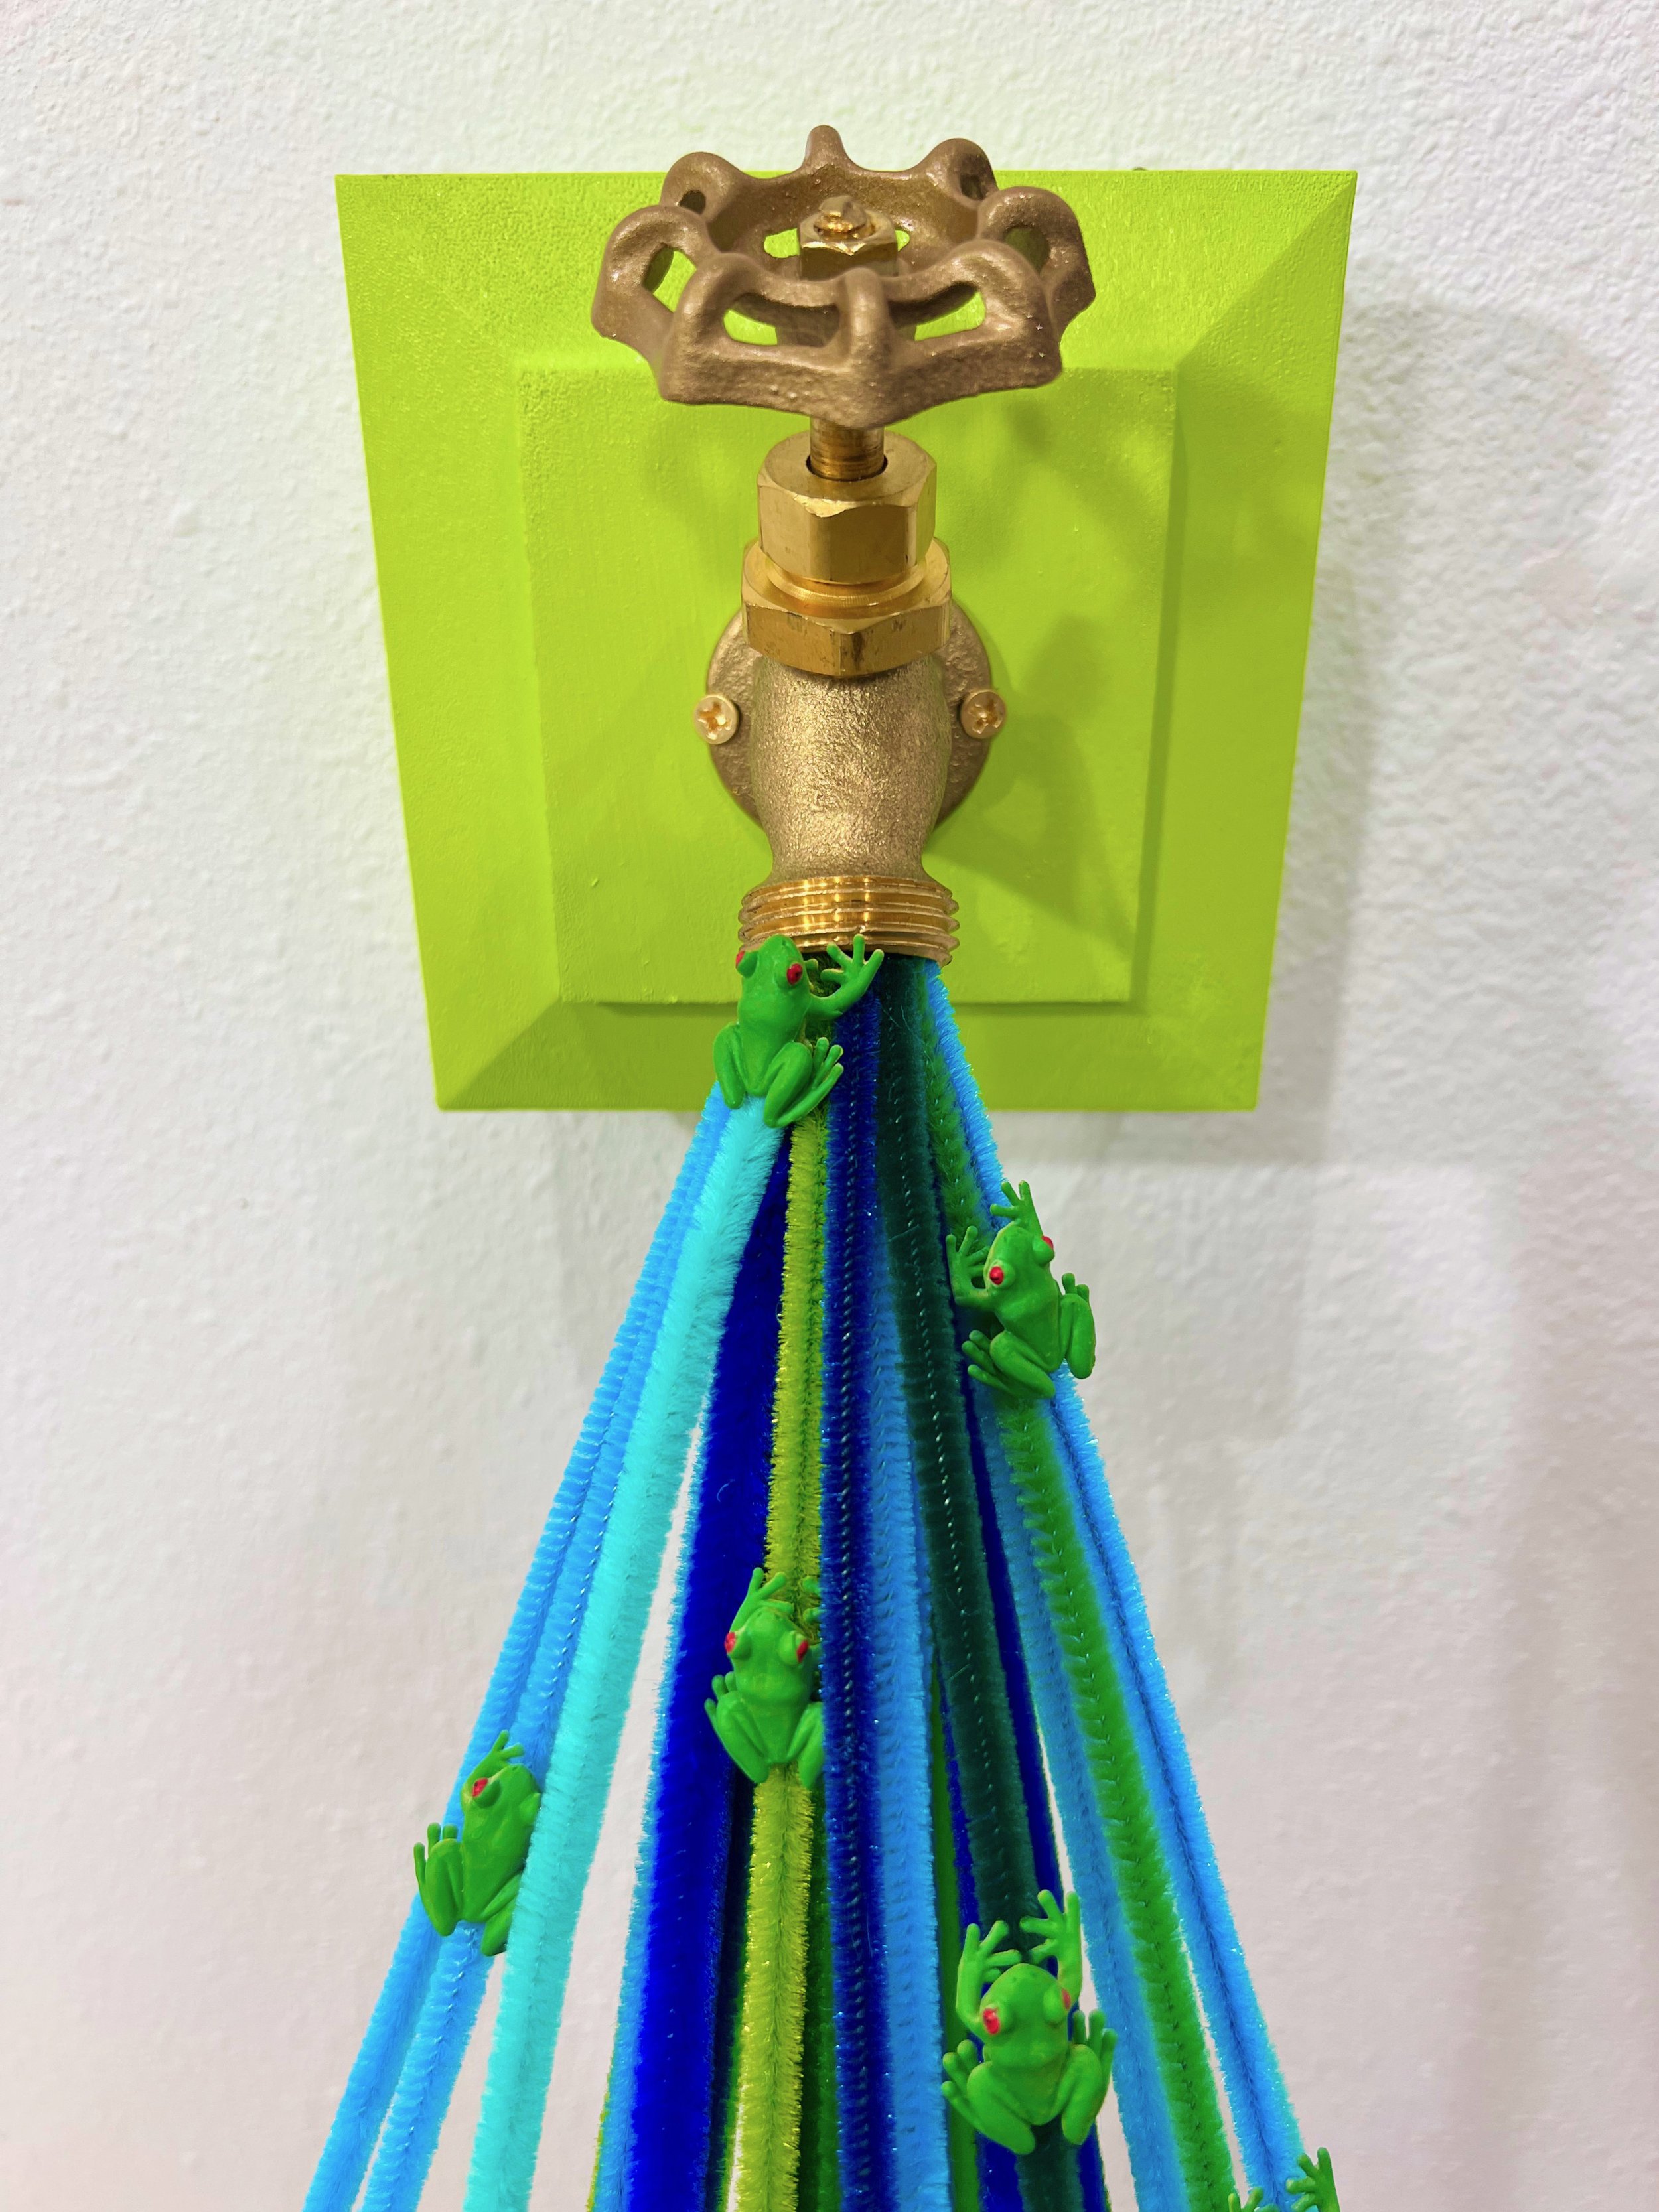 3d-Hallie-Rae-Ward-GREEN FROGS-Art-For-The-People-Gallery-Austin-Art-Gallery-Local-Art.jpeg